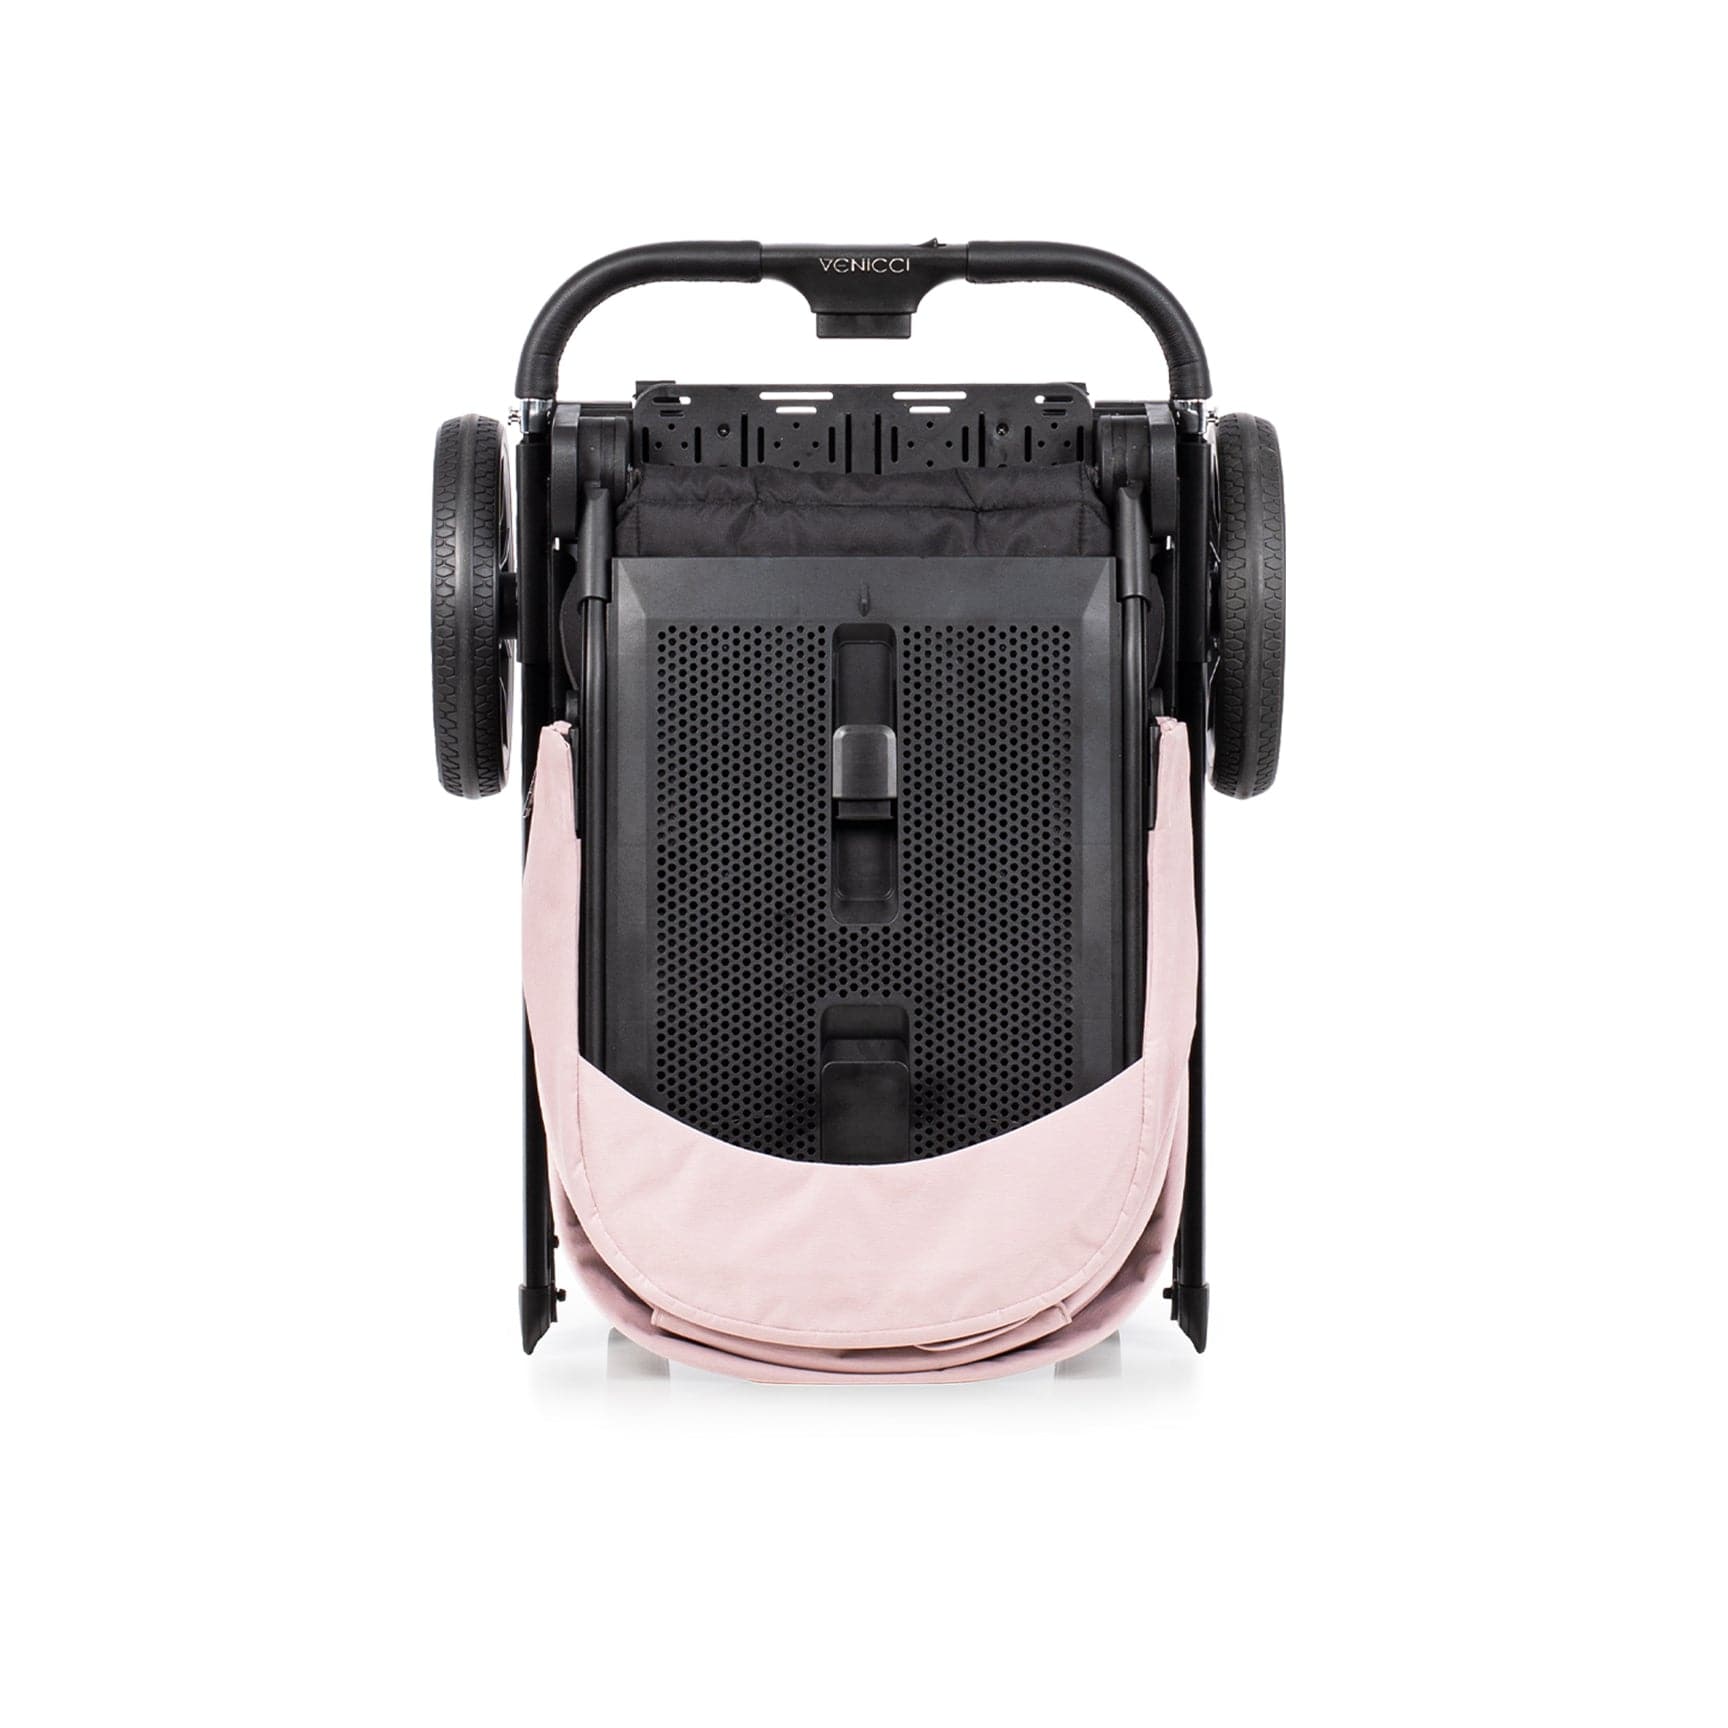 Venicci Empire Stroller & Accessory Pack in Silk Pink Pushchairs & Buggies 13177-SIL-PNK 5905261331175